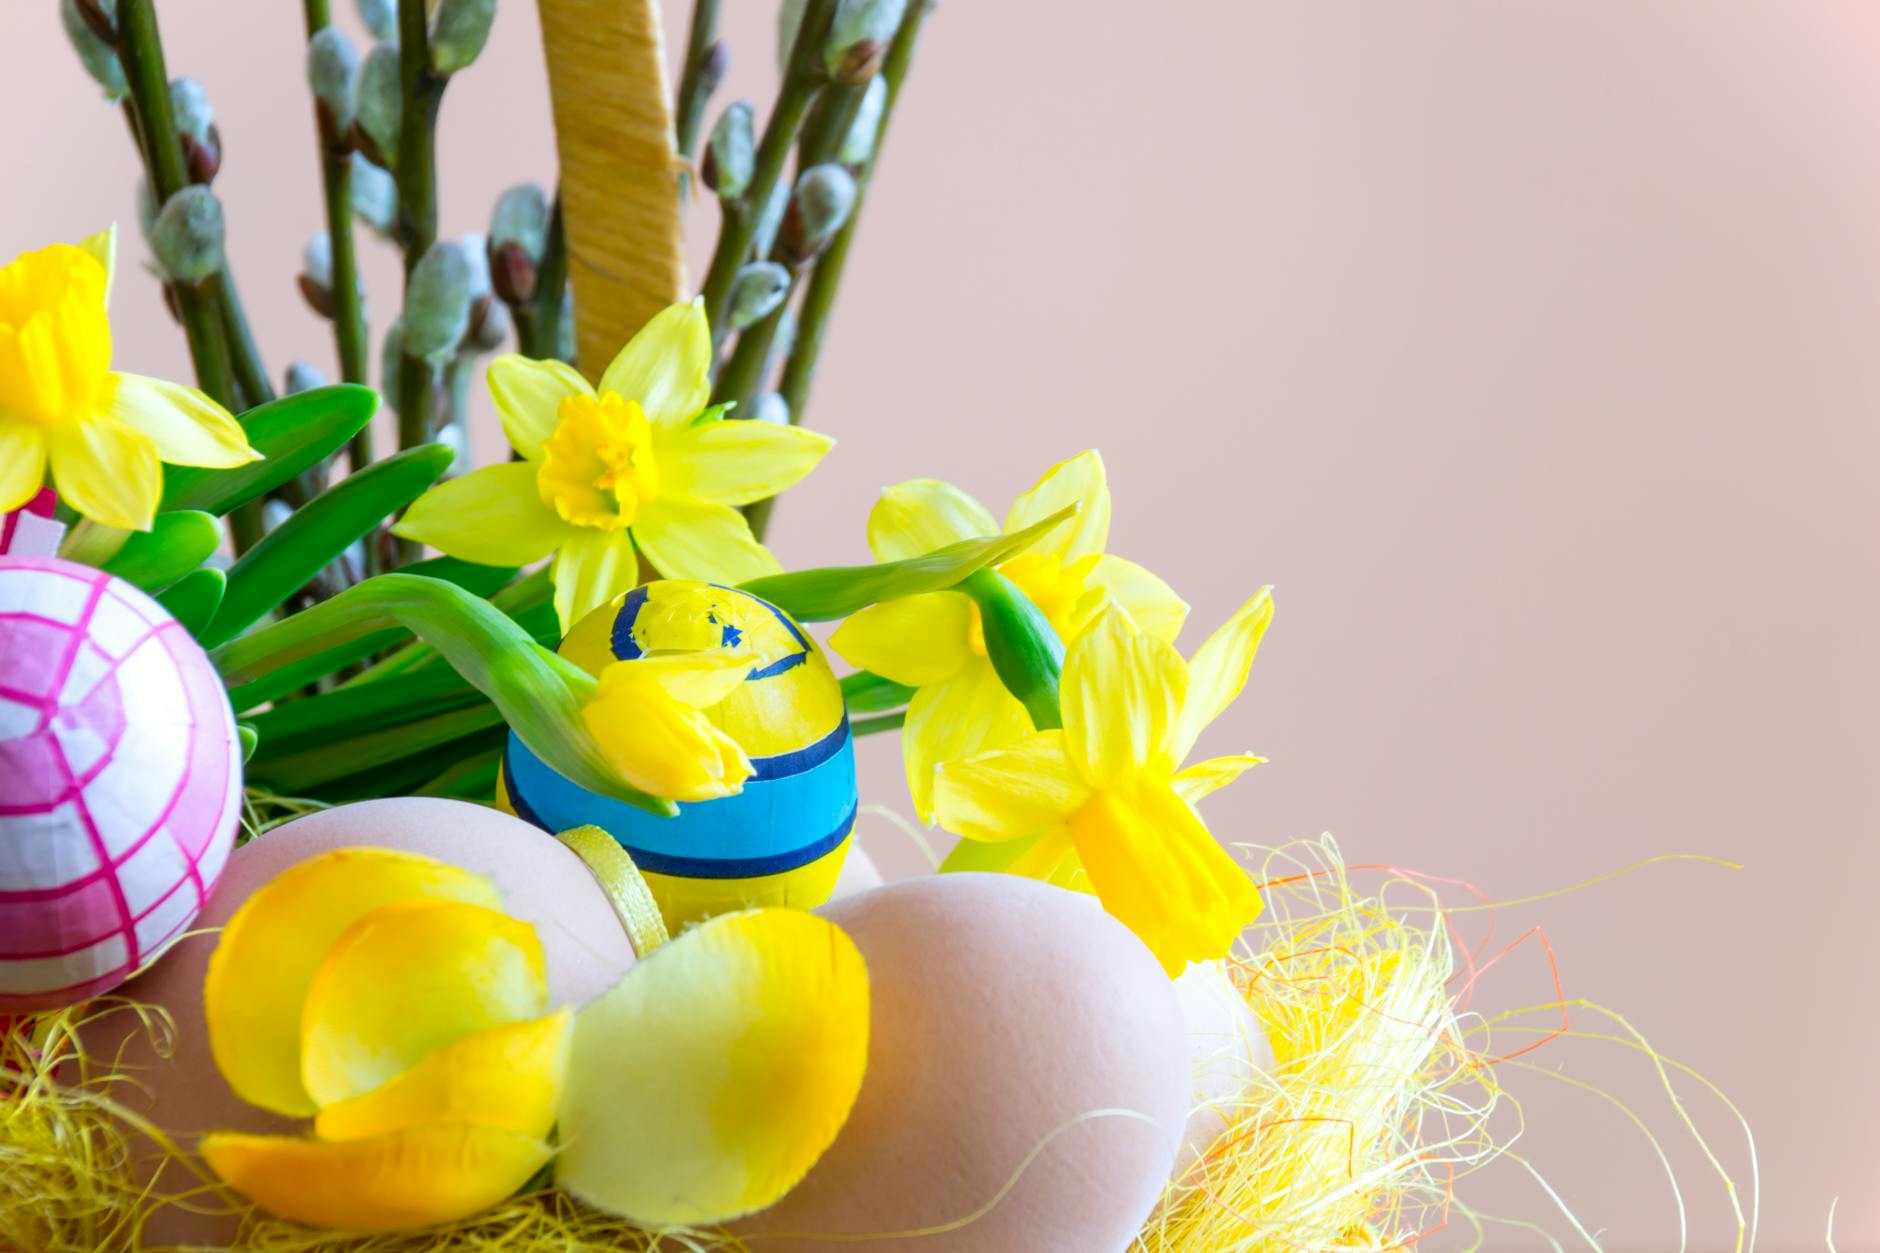 Easter: A time of renewal and hope